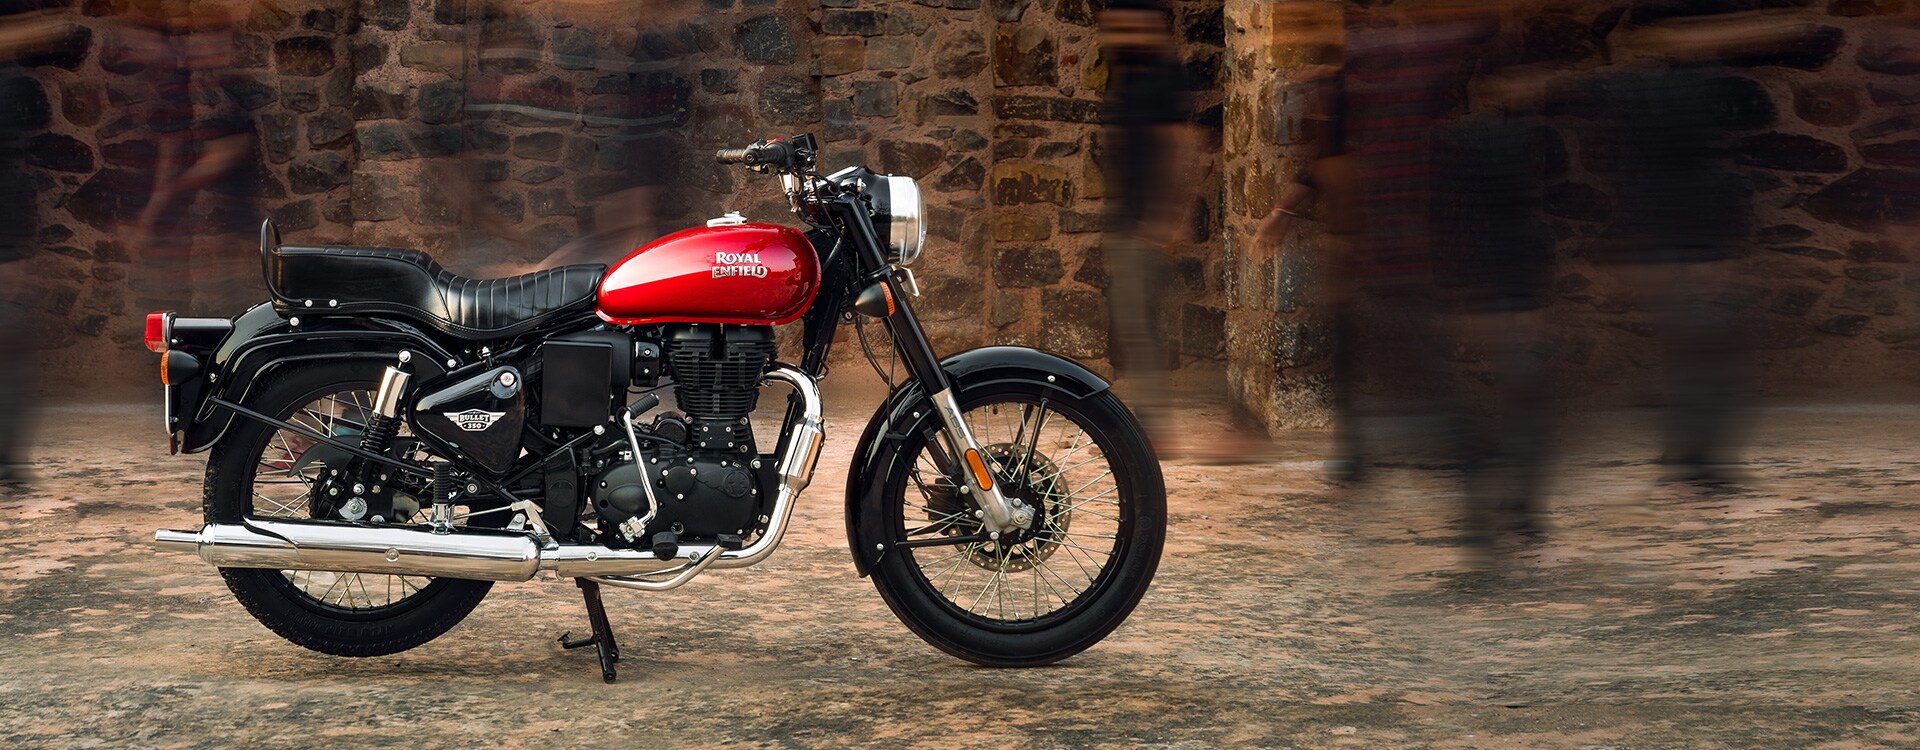 RE Bullet 350 ES Price, Colours, Images & India | Royal Enfield